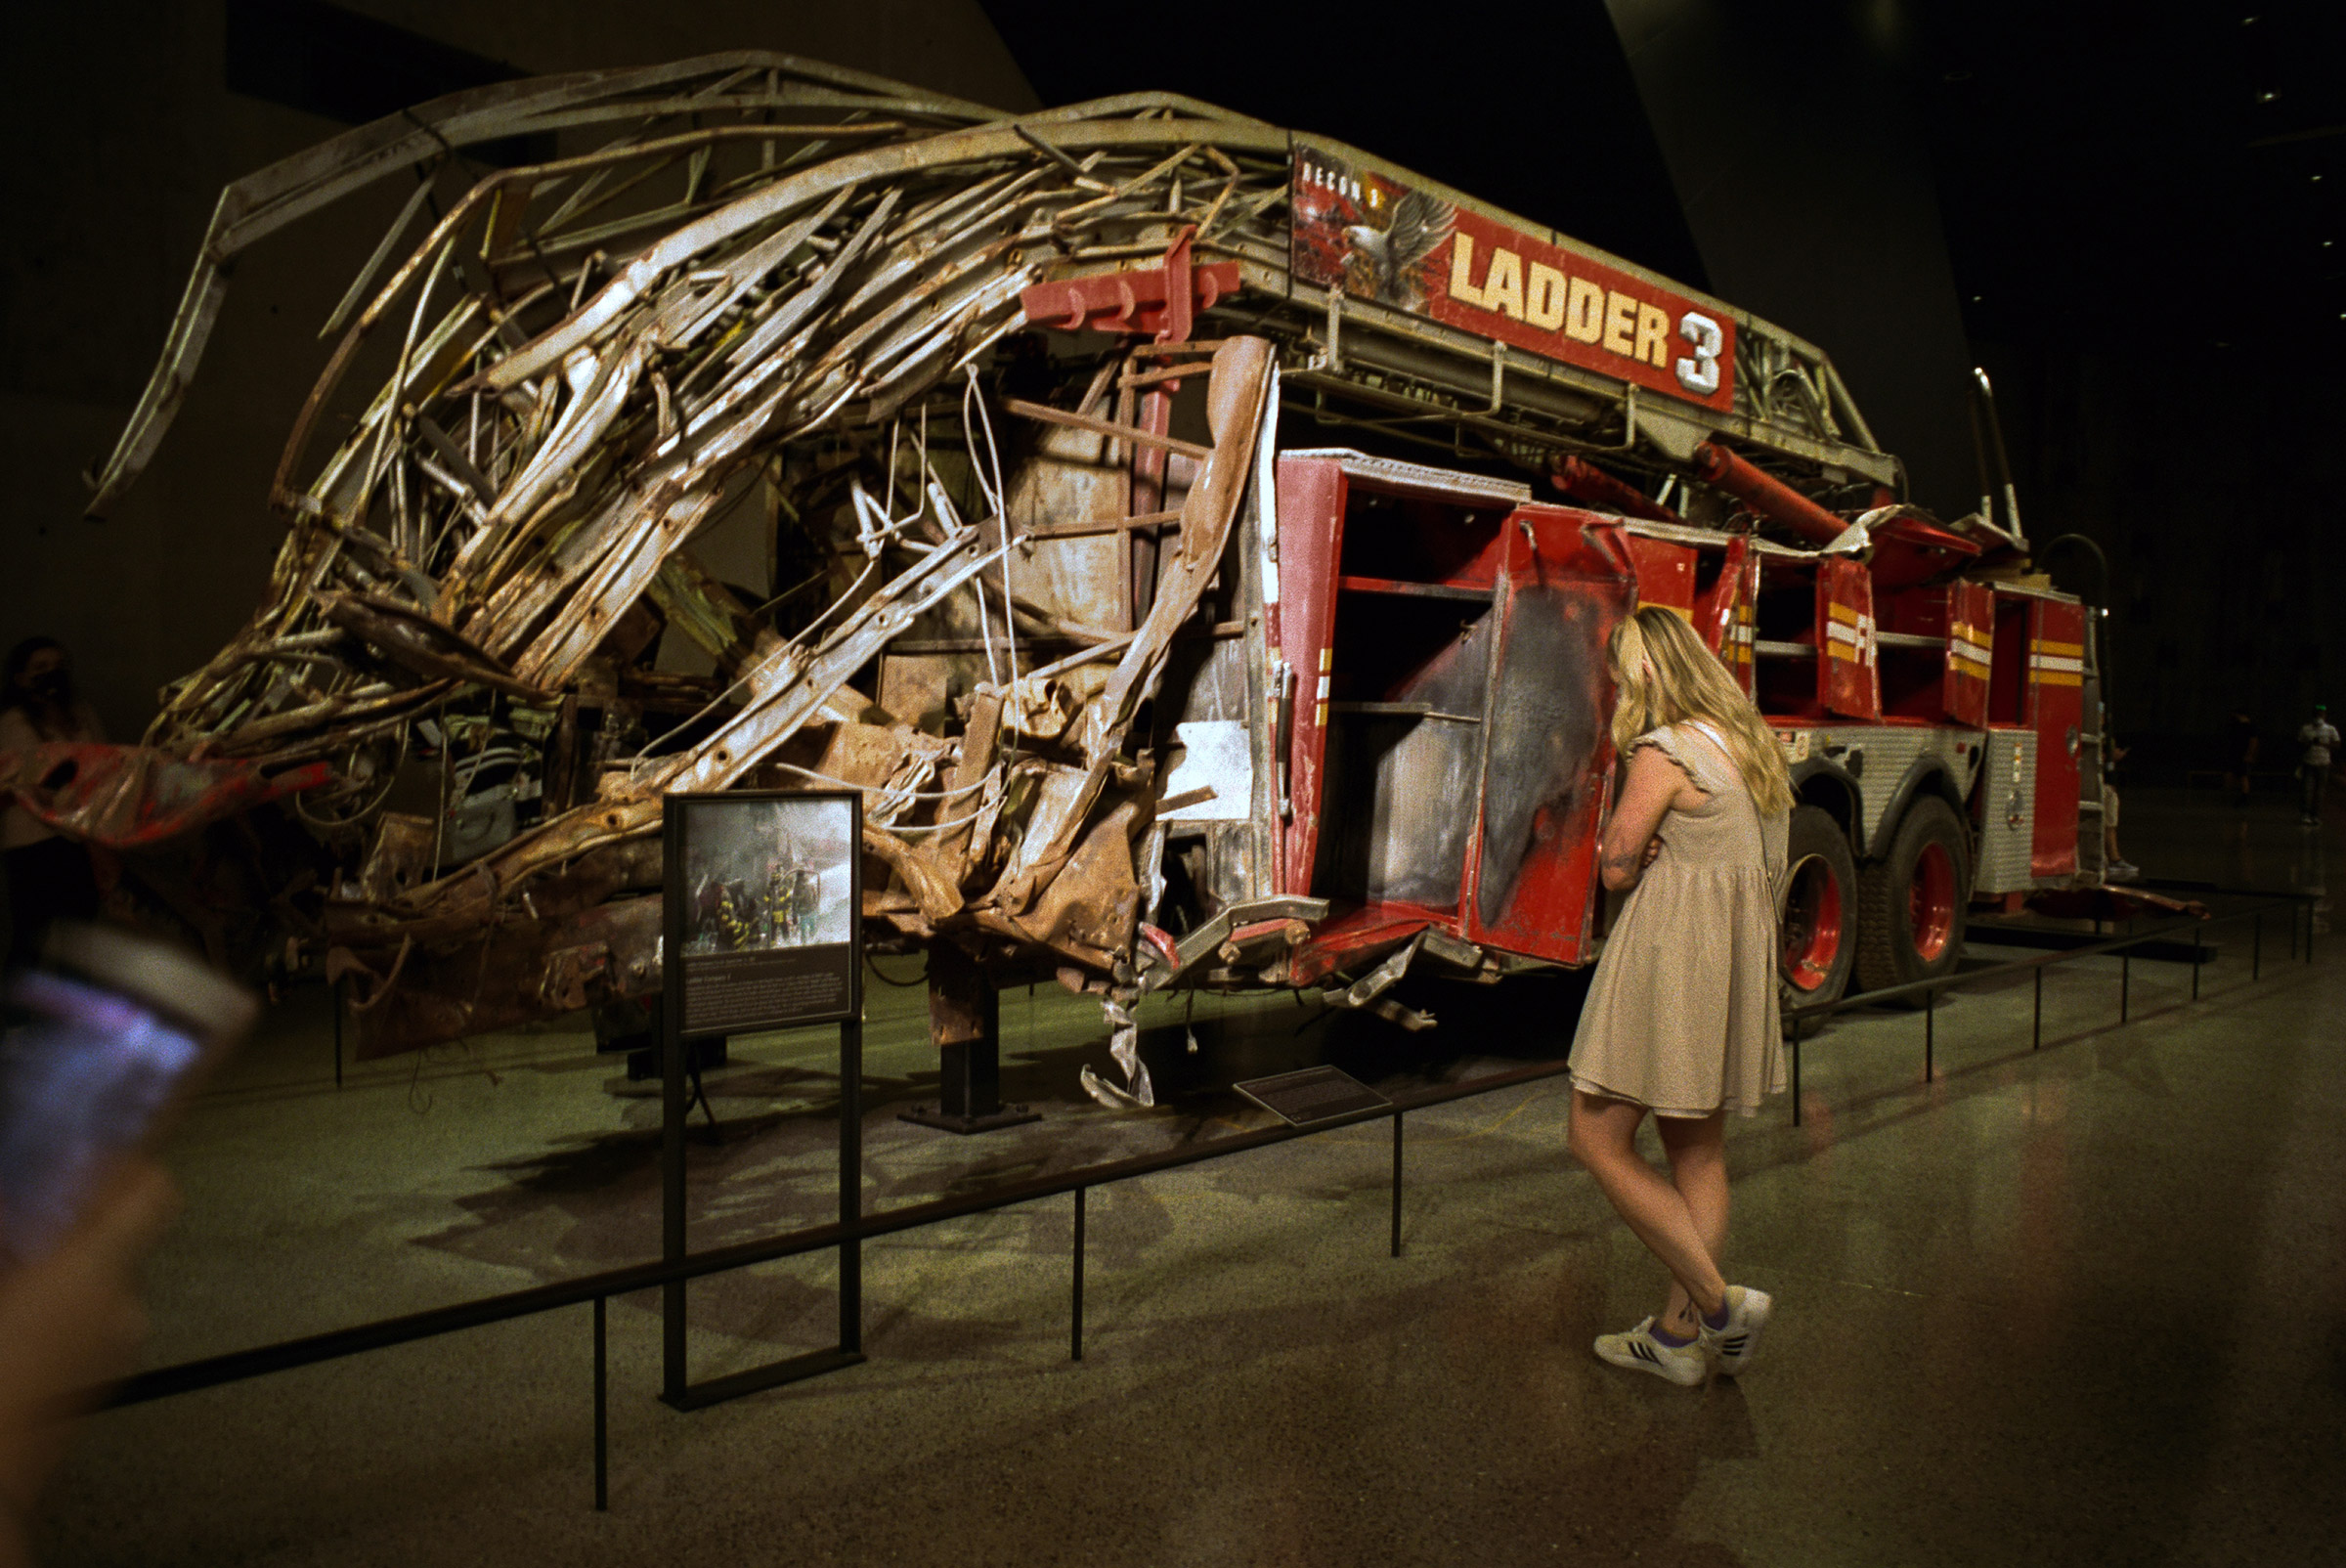 A mangled firetruck at the 9/11 Museum, Sept. 5, 2021. (Daniel Arnold for TIME)